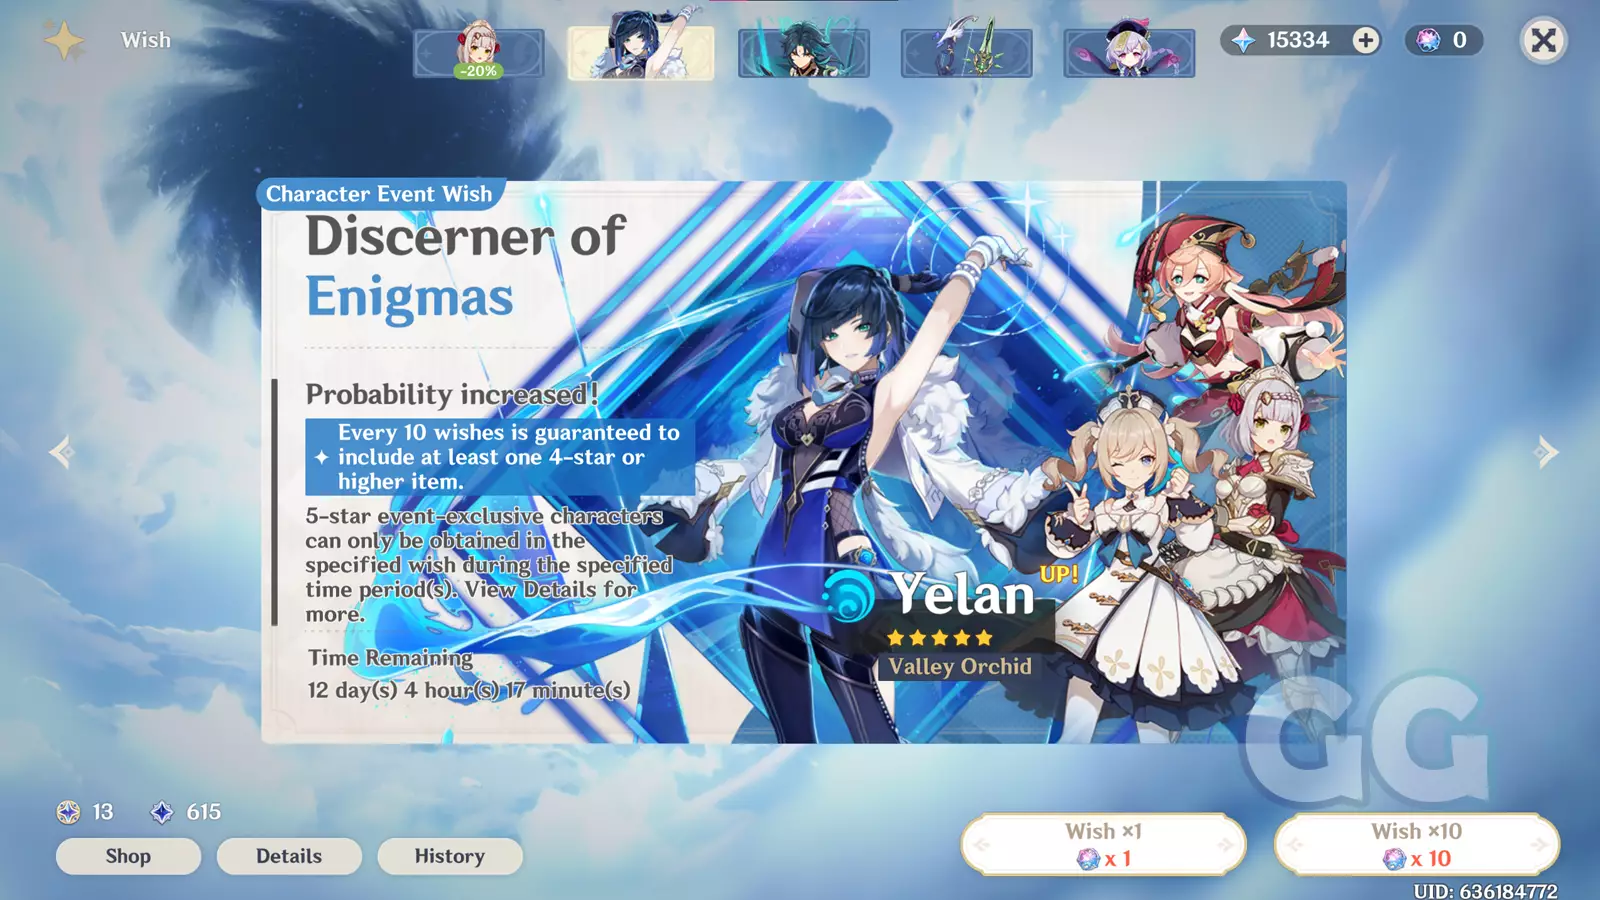 yelan banner in genshin impact showing different characters